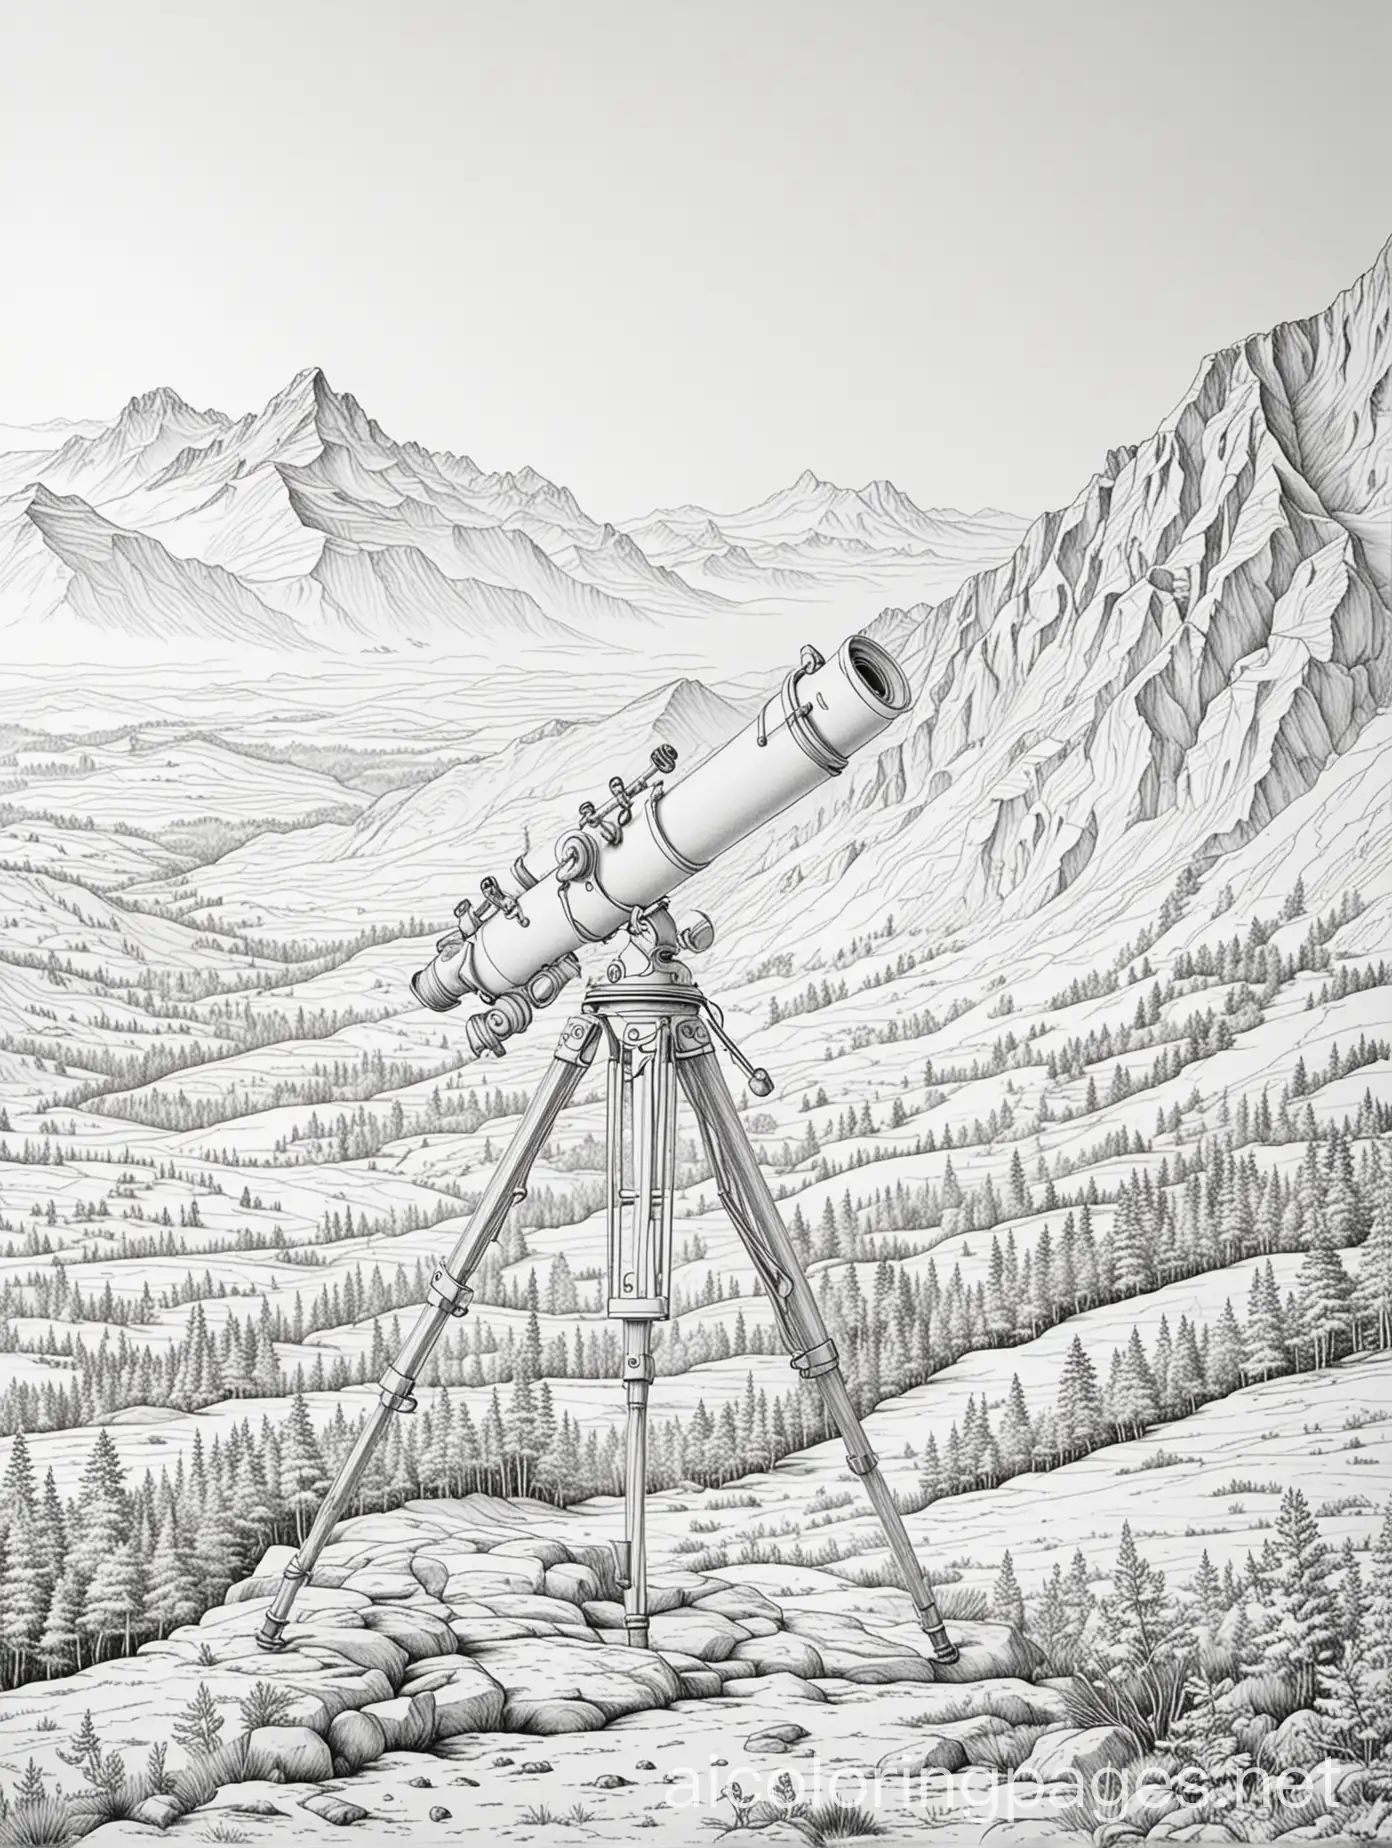 A telescope observatory on a mountain, coloring page, black and white, line art, white background, Simplicity, Ample White Space. The background of the coloring page is plain white to make it easier for children to color within the lines. The outlines of all the subjects are easy to distinguish, making it simple for kids to color., Coloring Page, black and white, line art, white background, Simplicity, Ample White Space. The background of the coloring page is plain white to make it easy for young children to color within the lines. The outlines of all the subjects are easy to distinguish, making it simple for kids to color without too much difficulty